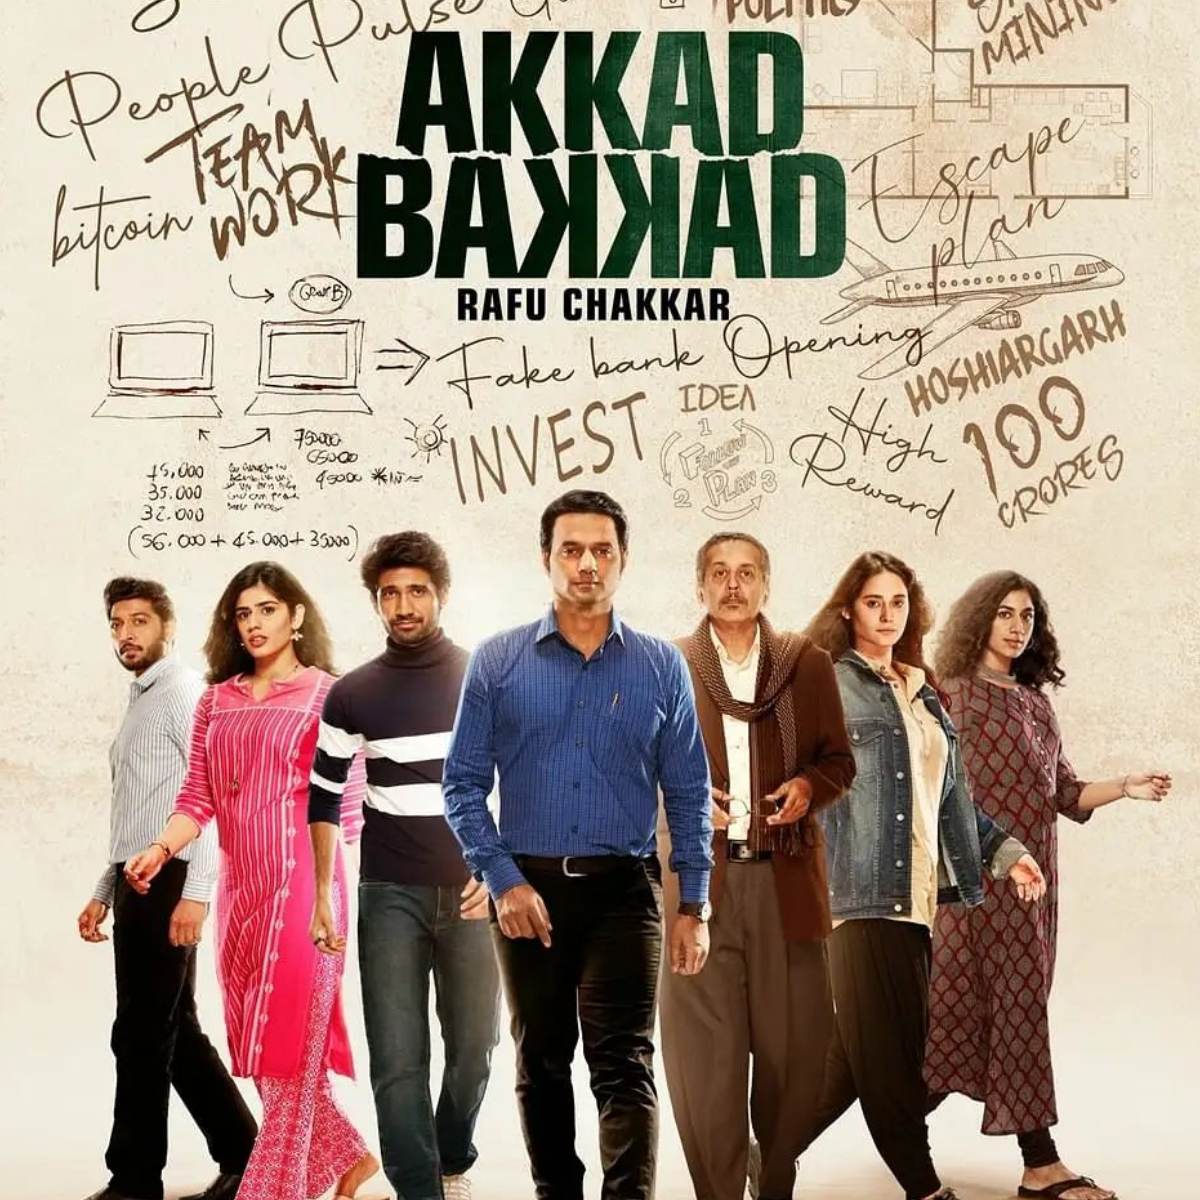 Akkad Bakkad Rafu Chakkar Ep 1 & 2 Review: A thrilling heist by rookie scamsters with a dream